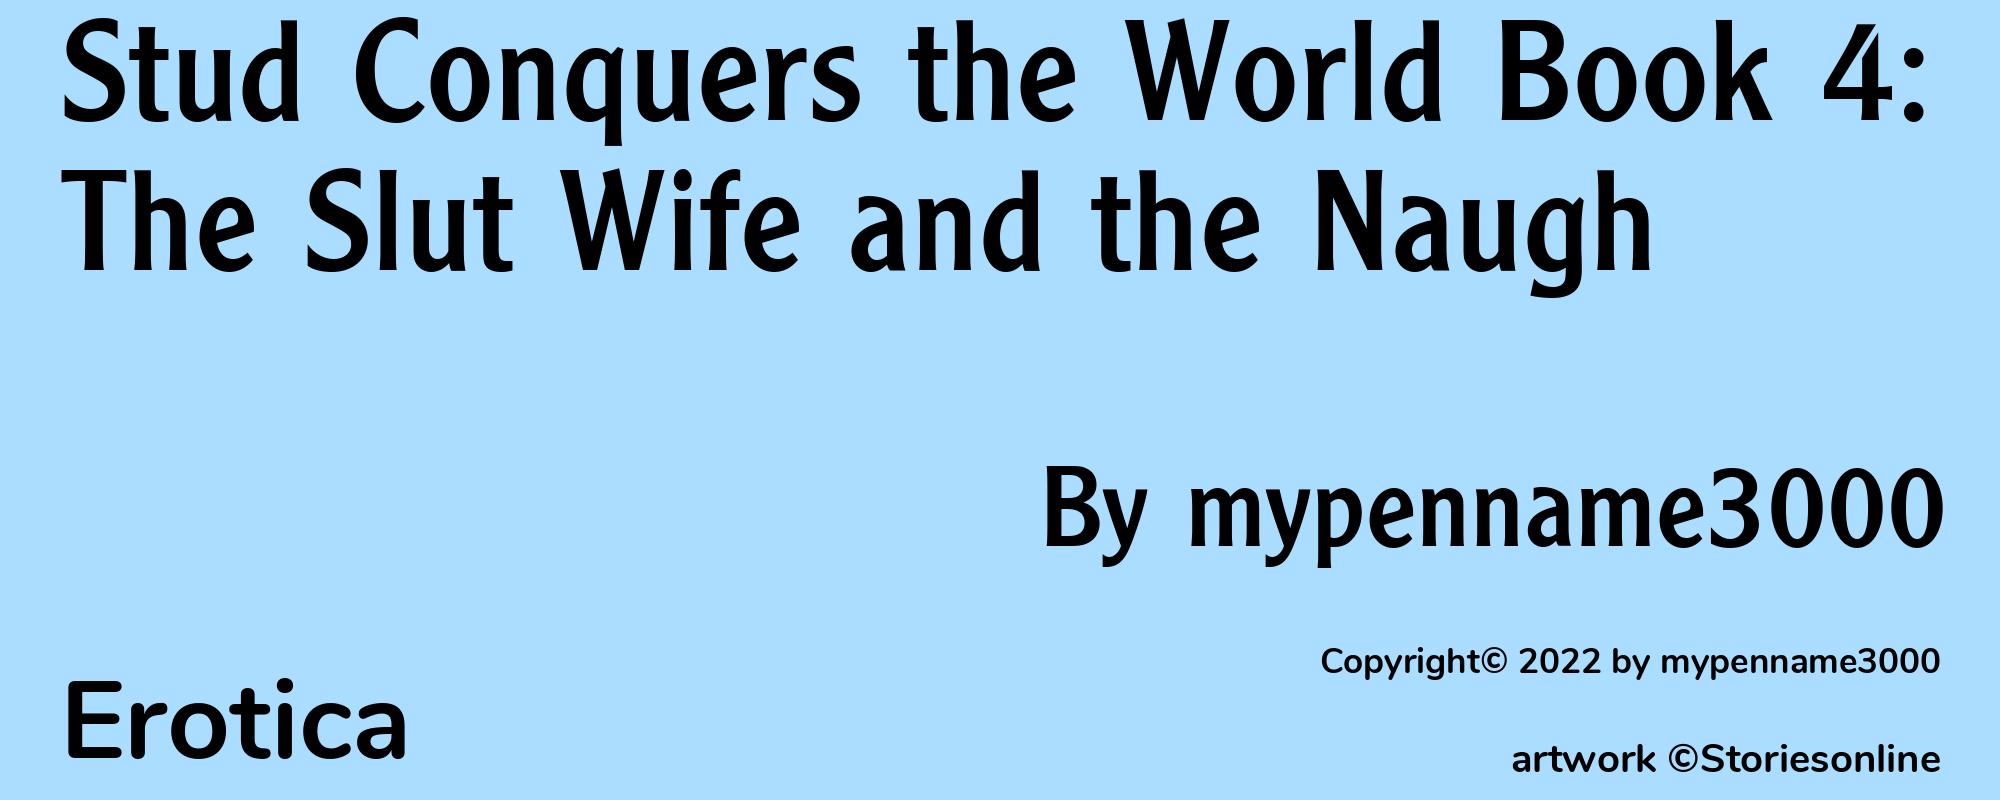 Stud Conquers the World Book 4: The Slut Wife and the Naugh - Cover